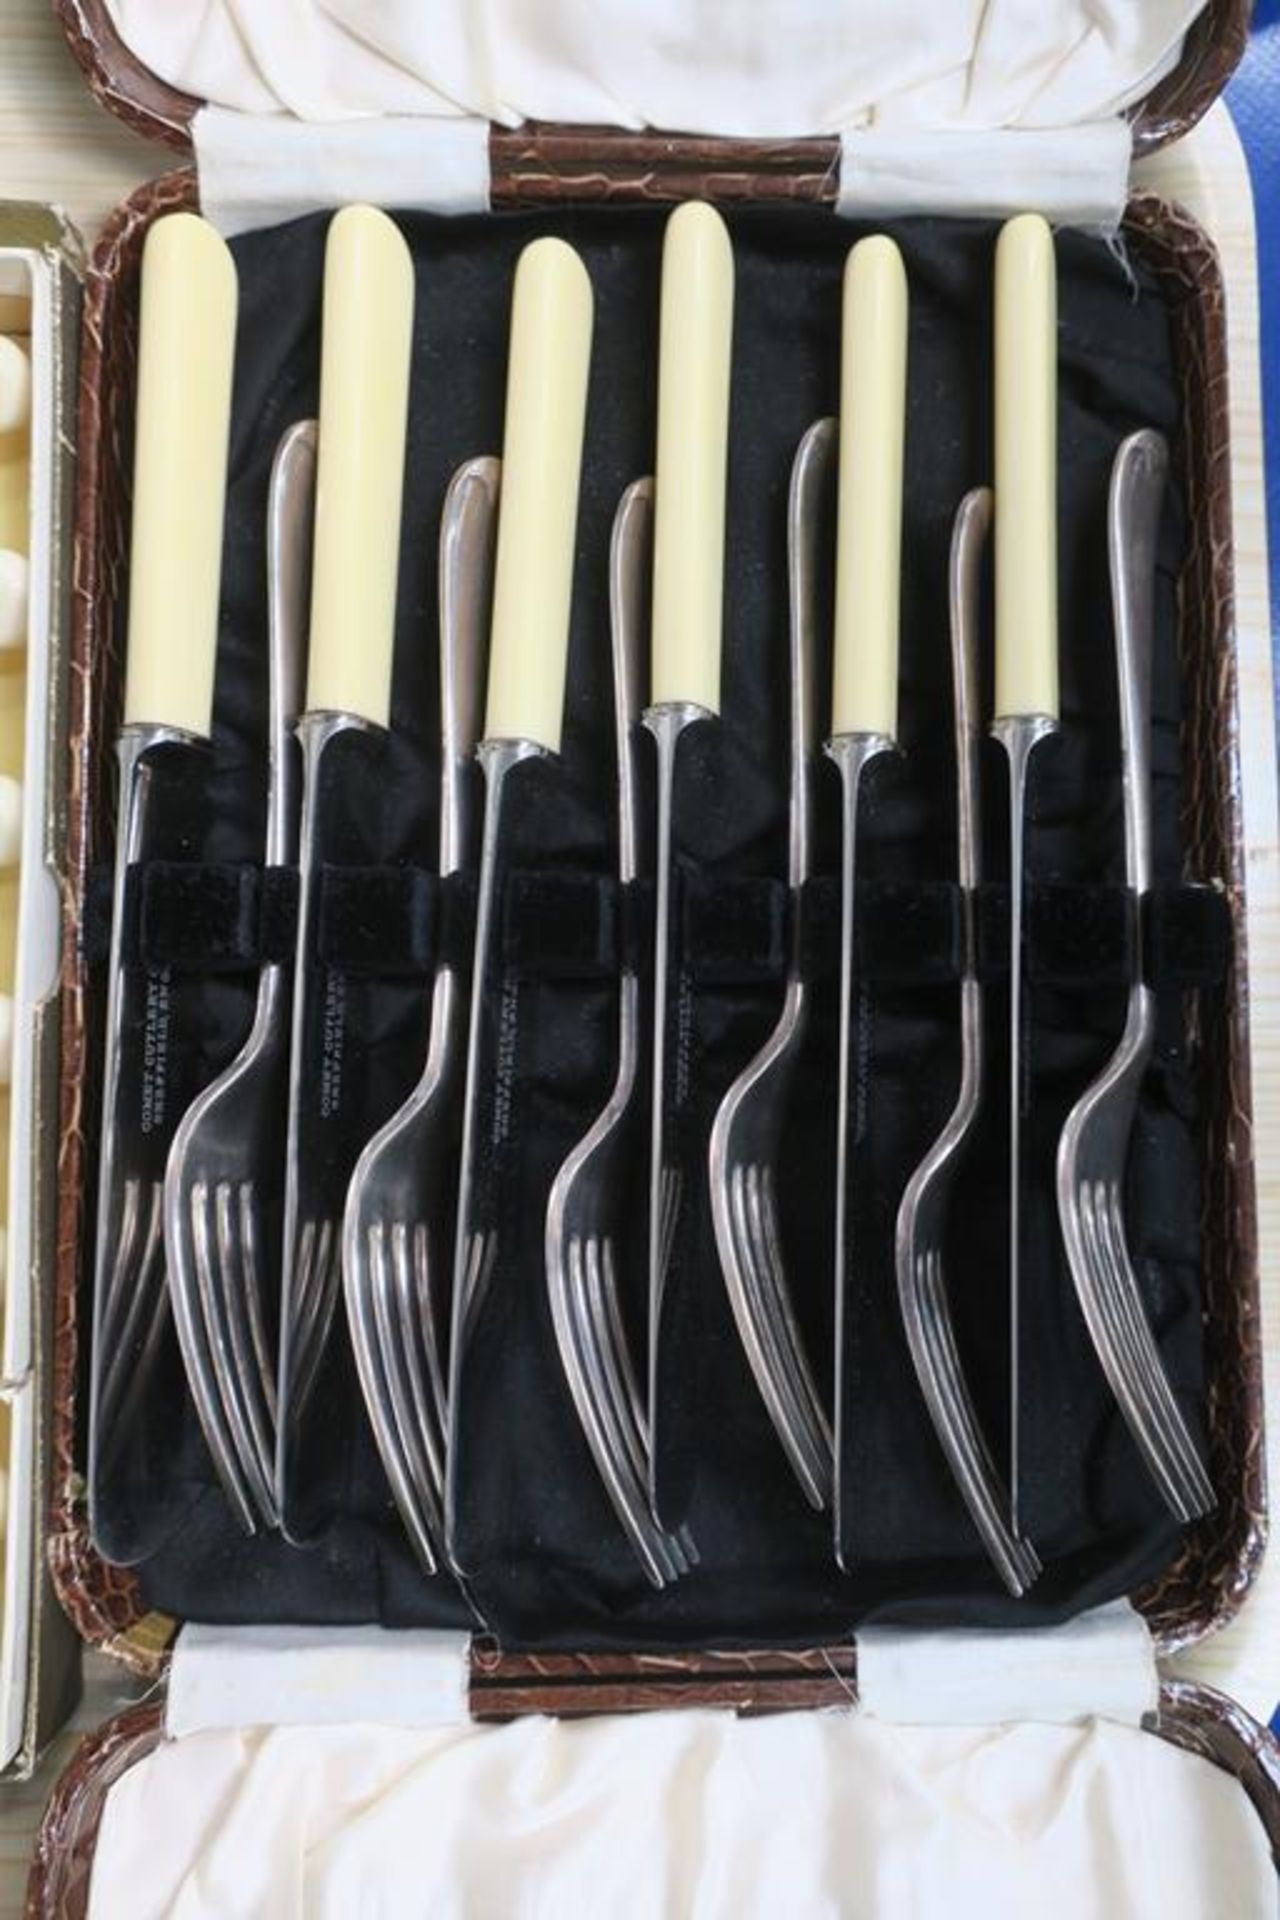 Two Boxed Sets of Knifes and Forks together with S - Image 3 of 5